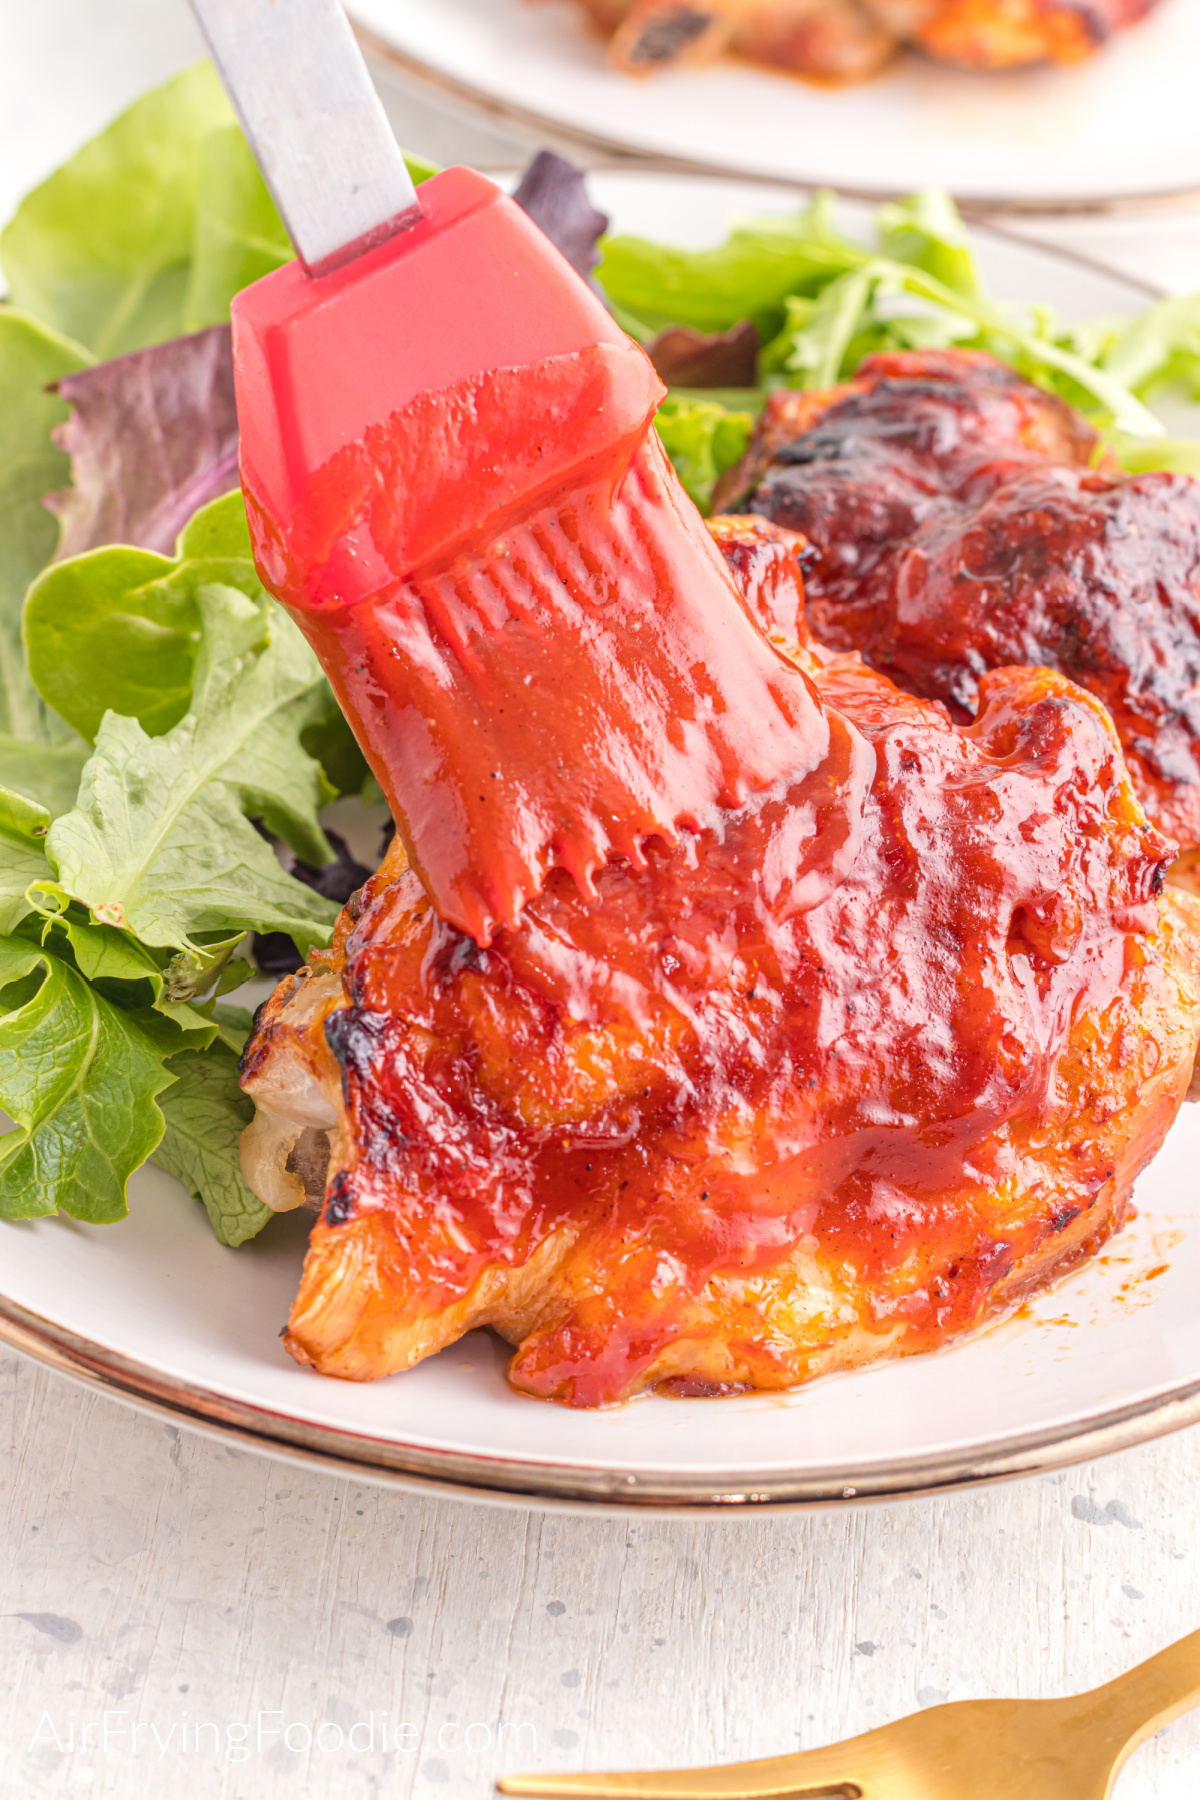 BBQ chicken thighs being brushed with additional BBQ sauce on a plate with a side salad.